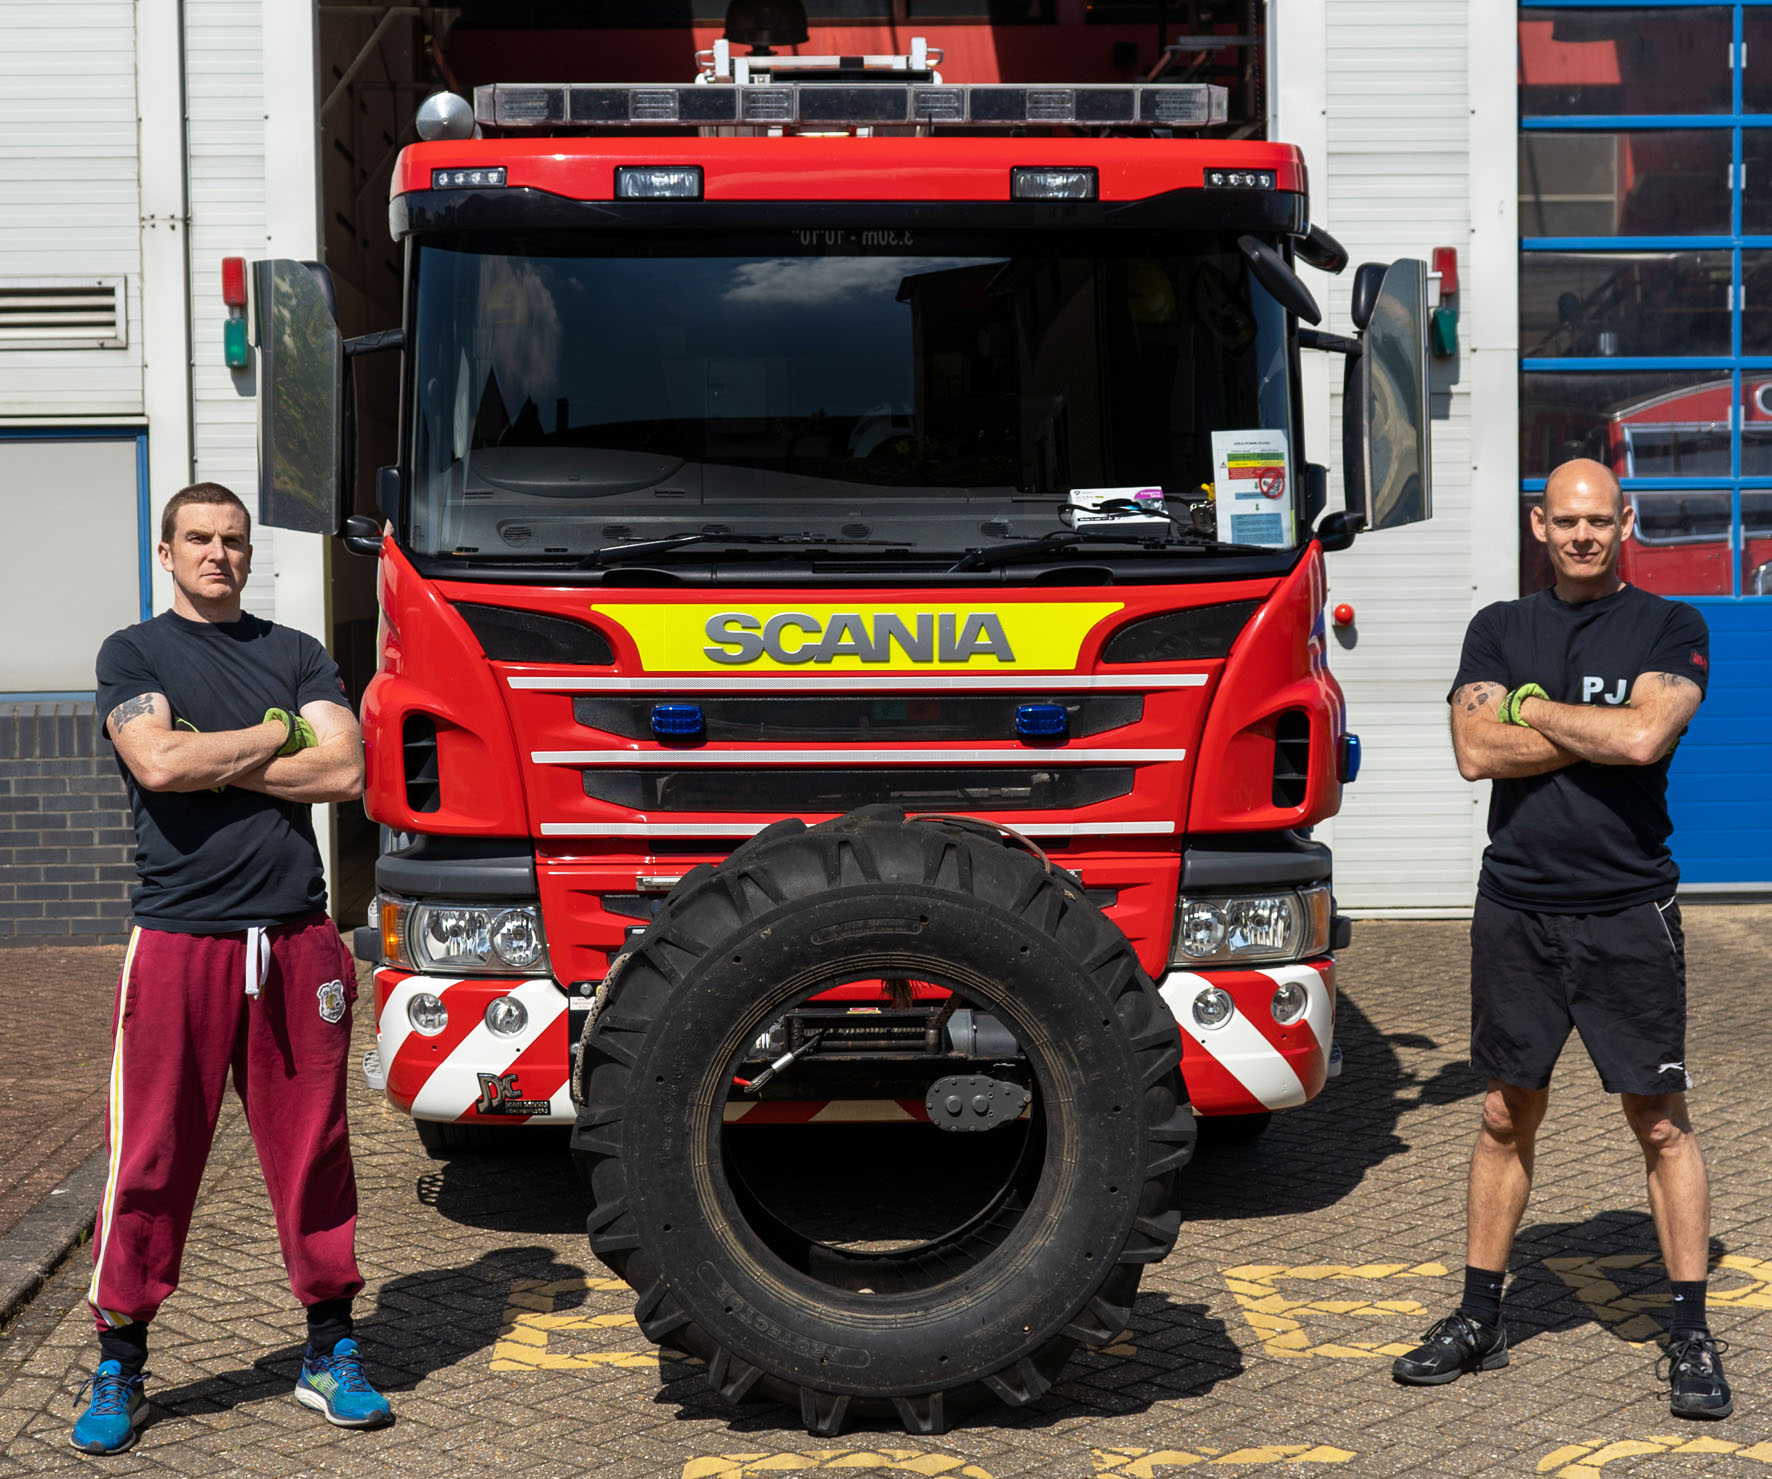 Westlea firefighters Alex Davidson and Paul Jarmey are pictured with the lorry tyre they are flipping for charity